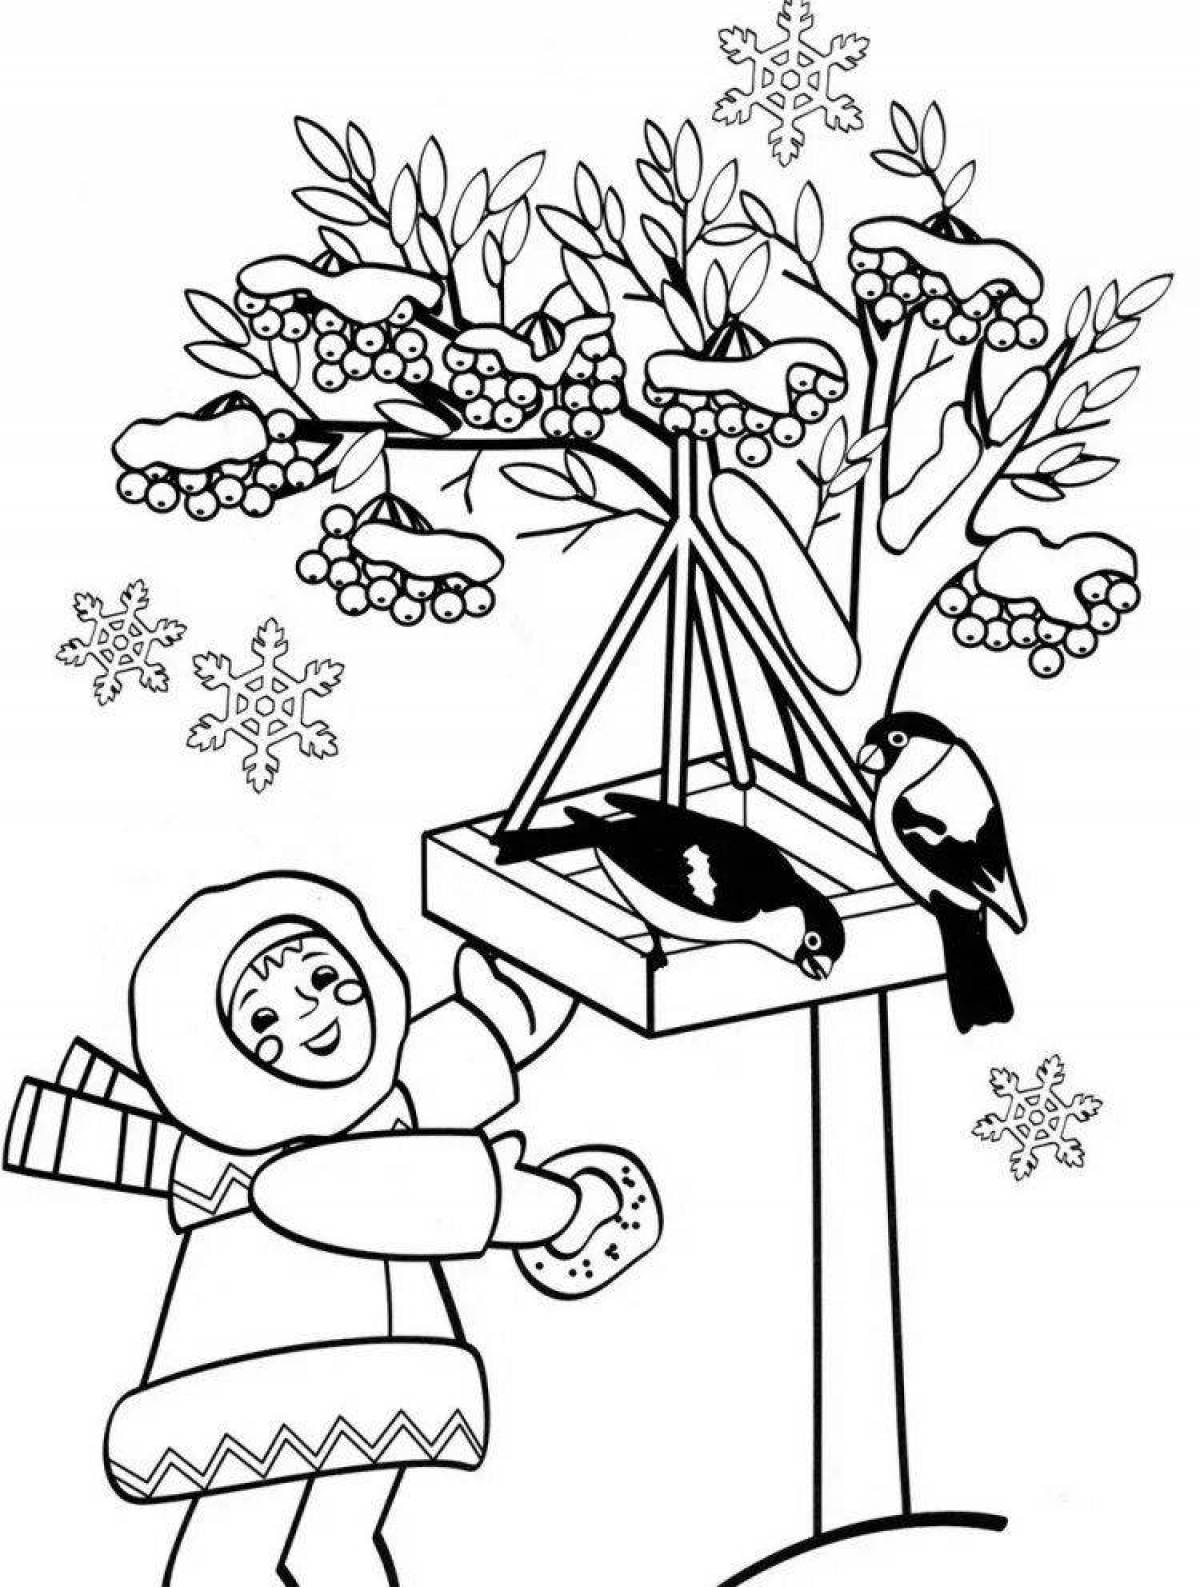 Fine winter birds coloring pages for kids